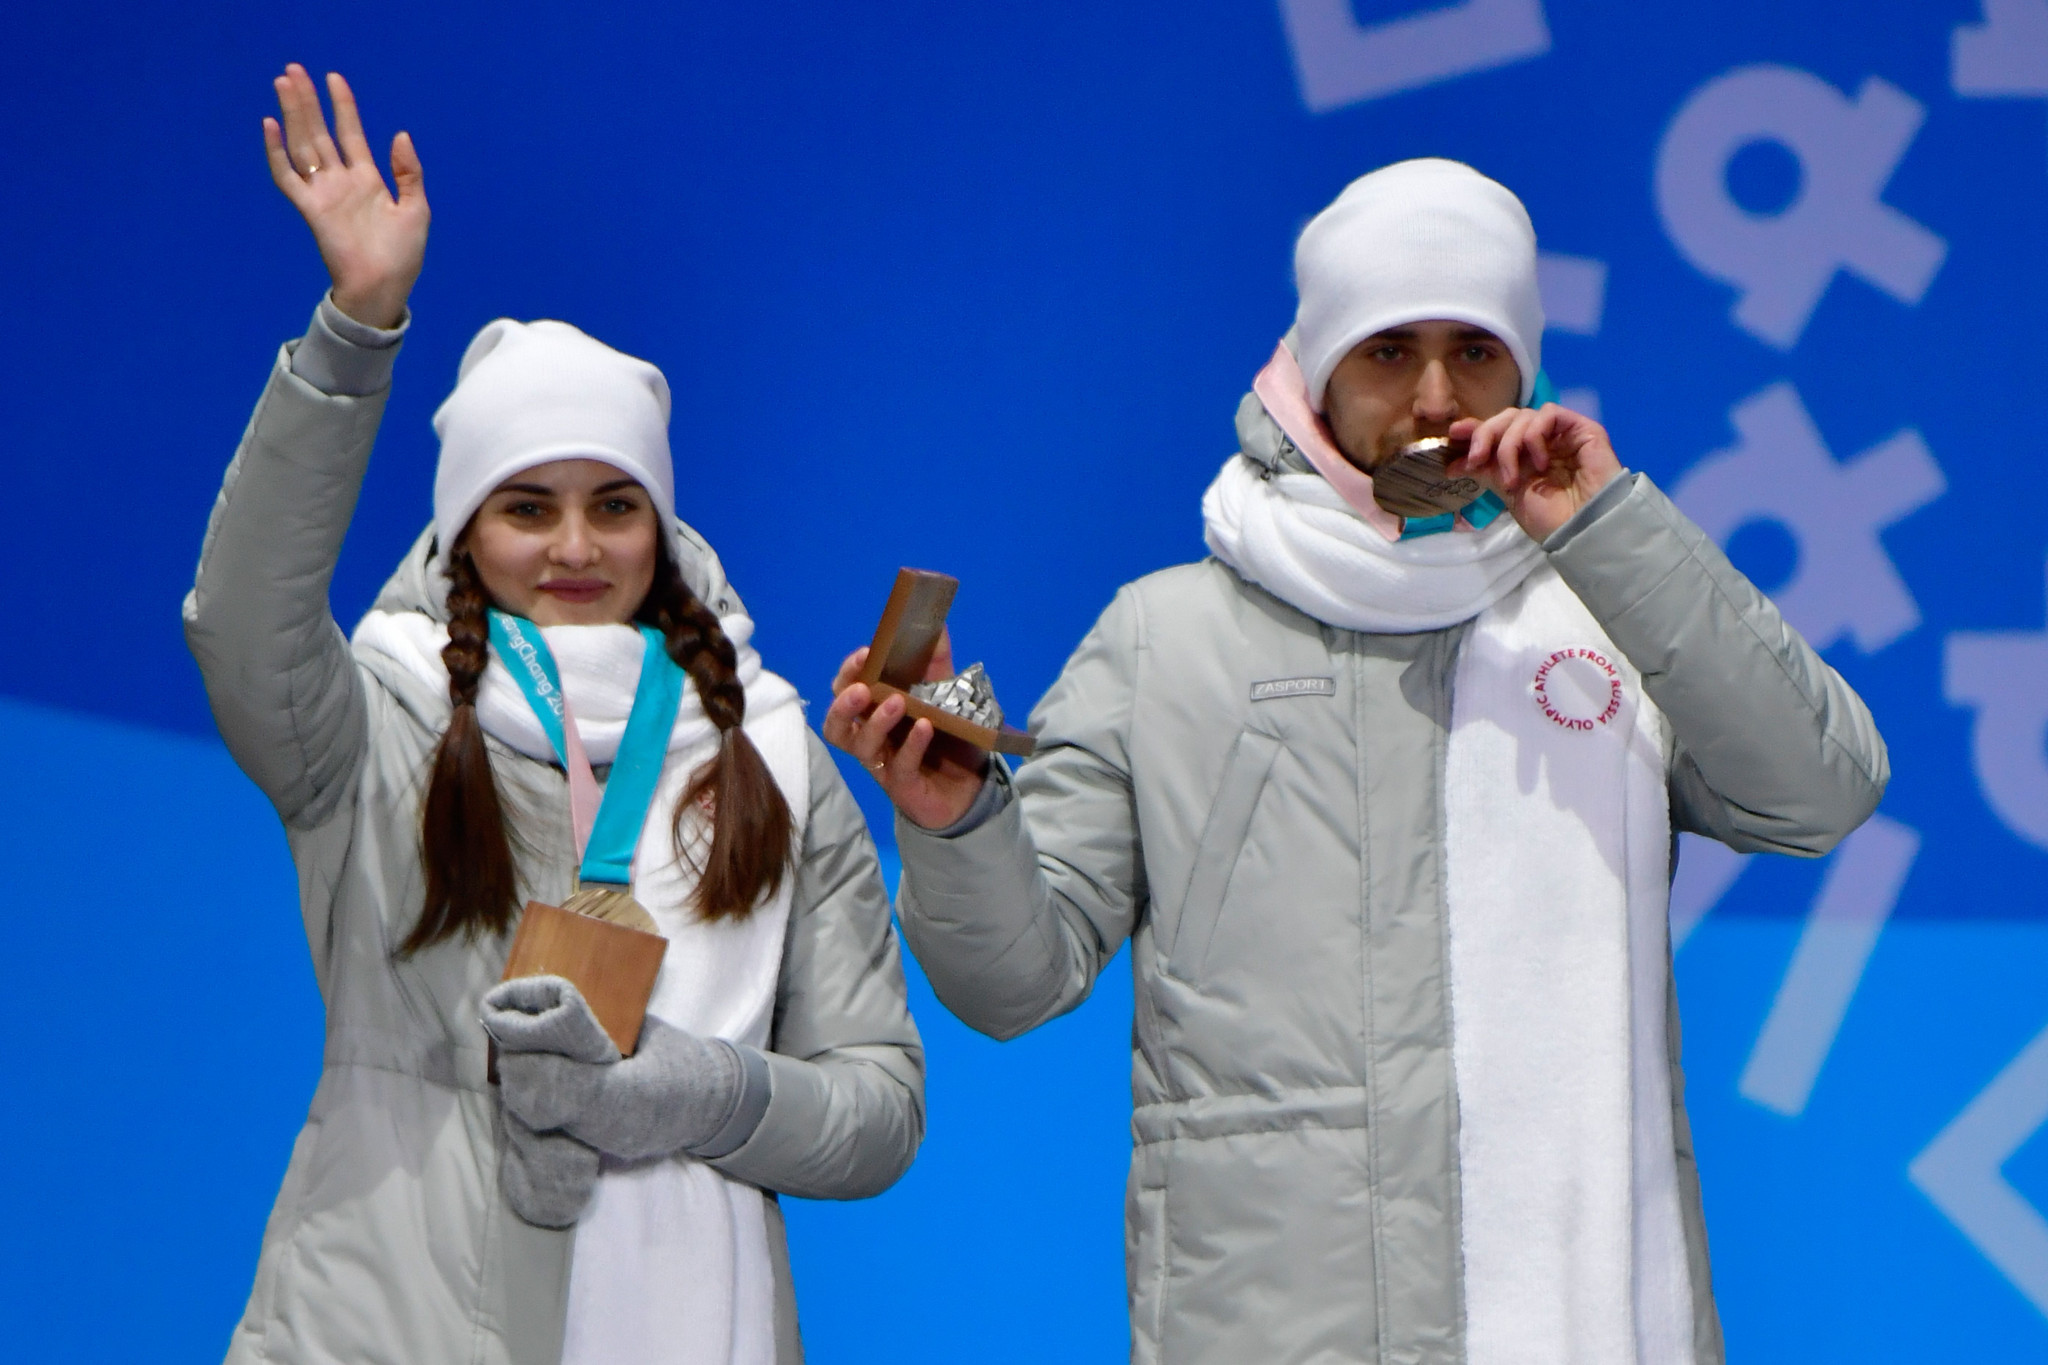 Aleksandr Krushelnitckii, right, and Anastasia Bryzgalova were later stripped of the bronze medals secured at Pyeongchang 2018 ©Getty Images